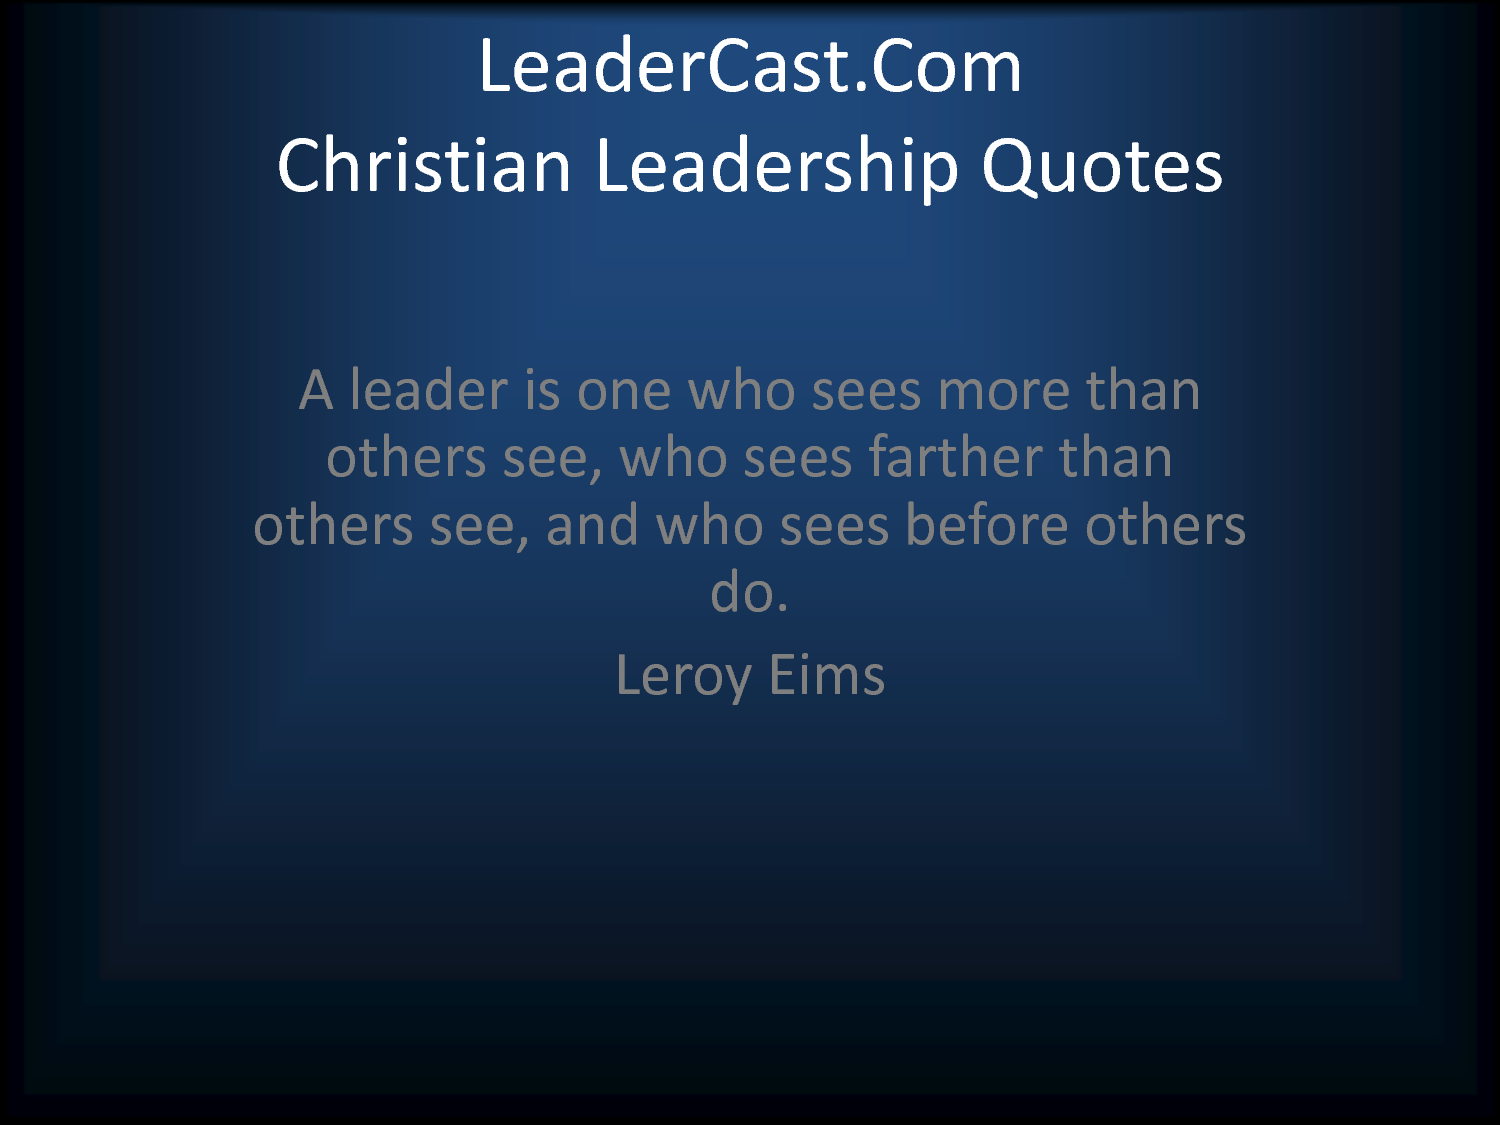 A leader is one who sees more than others see, who sees farther than others see, and who sees before others do.